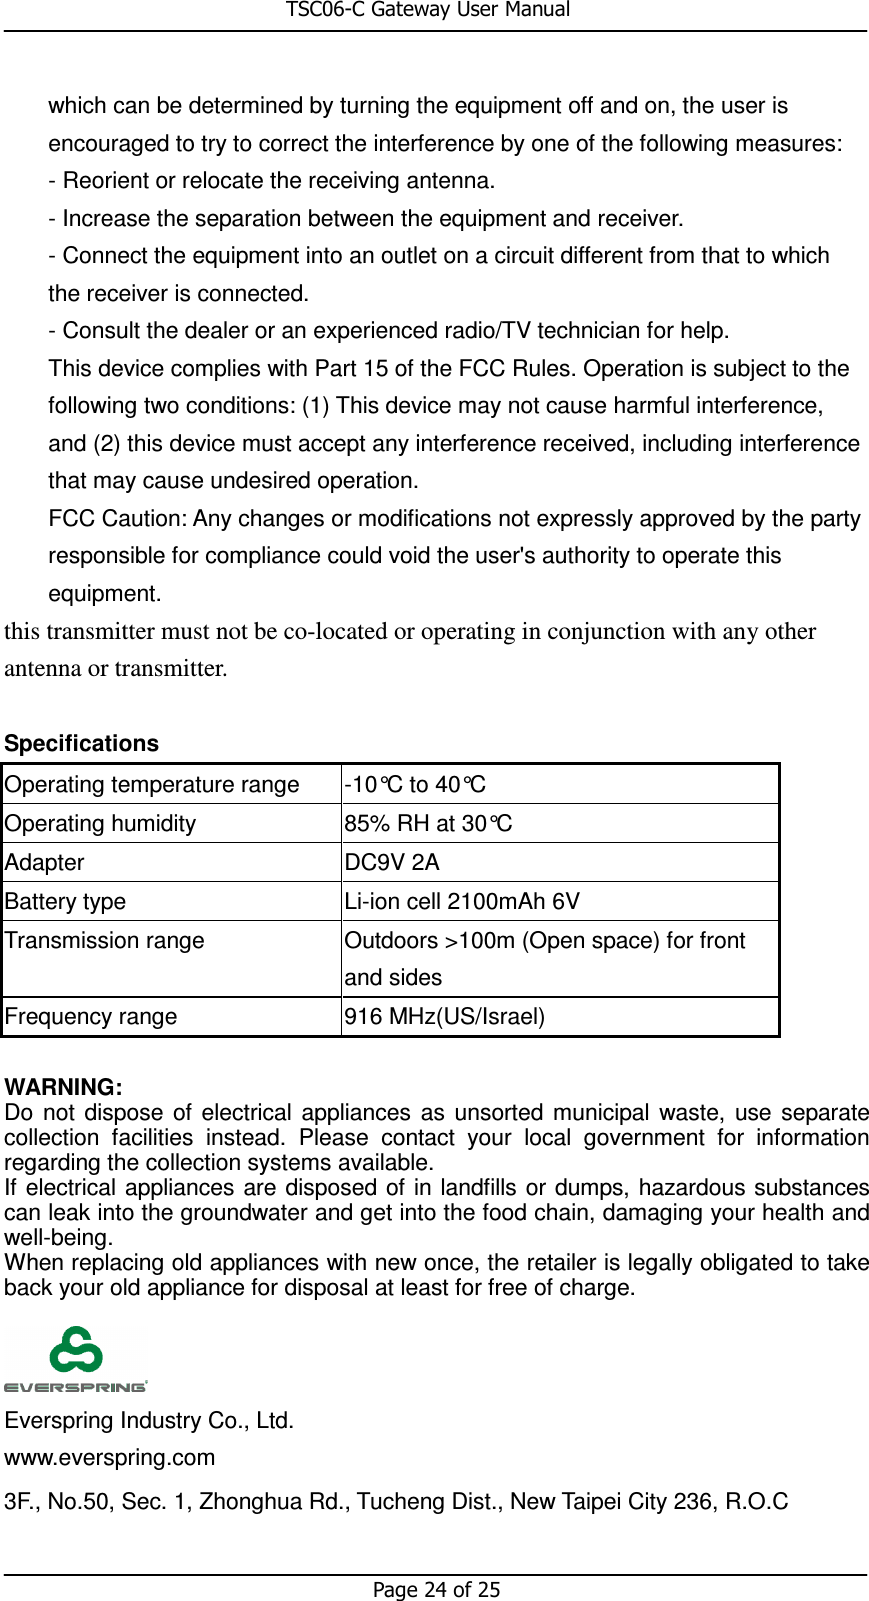                                                       TSC06-C Gateway User Manual   Page 24 of 25  which can be determined by turning the equipment off and on, the user is encouraged to try to correct the interference by one of the following measures: - Reorient or relocate the receiving antenna. - Increase the separation between the equipment and receiver. - Connect the equipment into an outlet on a circuit different from that to which the receiver is connected. - Consult the dealer or an experienced radio/TV technician for help. This device complies with Part 15 of the FCC Rules. Operation is subject to the following two conditions: (1) This device may not cause harmful interference, and (2) this device must accept any interference received, including interference that may cause undesired operation. FCC Caution: Any changes or modifications not expressly approved by the party responsible for compliance could void the user&apos;s authority to operate this equipment. this transmitter must not be co-located or operating in conjunction with any other antenna or transmitter.  Specifications Operating temperature range  -10°C to 40°C Operating humidity  85% RH at 30°C Adapter    DC9V 2A Battery type  Li-ion cell 2100mAh 6V Transmission range  Outdoors &gt;100m (Open space) for front and sides Frequency range  916 MHz(US/Israel)    WARNING: Do  not  dispose  of  electrical  appliances  as  unsorted municipal  waste,  use  separate collection  facilities  instead.  Please  contact  your  local  government  for  information regarding the collection systems available. If electrical  appliances are  disposed of  in landfills  or dumps, hazardous substances can leak into the groundwater and get into the food chain, damaging your health and well-being.   When replacing old appliances with new once, the retailer is legally obligated to take back your old appliance for disposal at least for free of charge.       Everspring Industry Co., Ltd.    www.everspring.com  3F., No.50, Sec. 1, Zhonghua Rd., Tucheng Dist., New Taipei City 236, R.O.C  